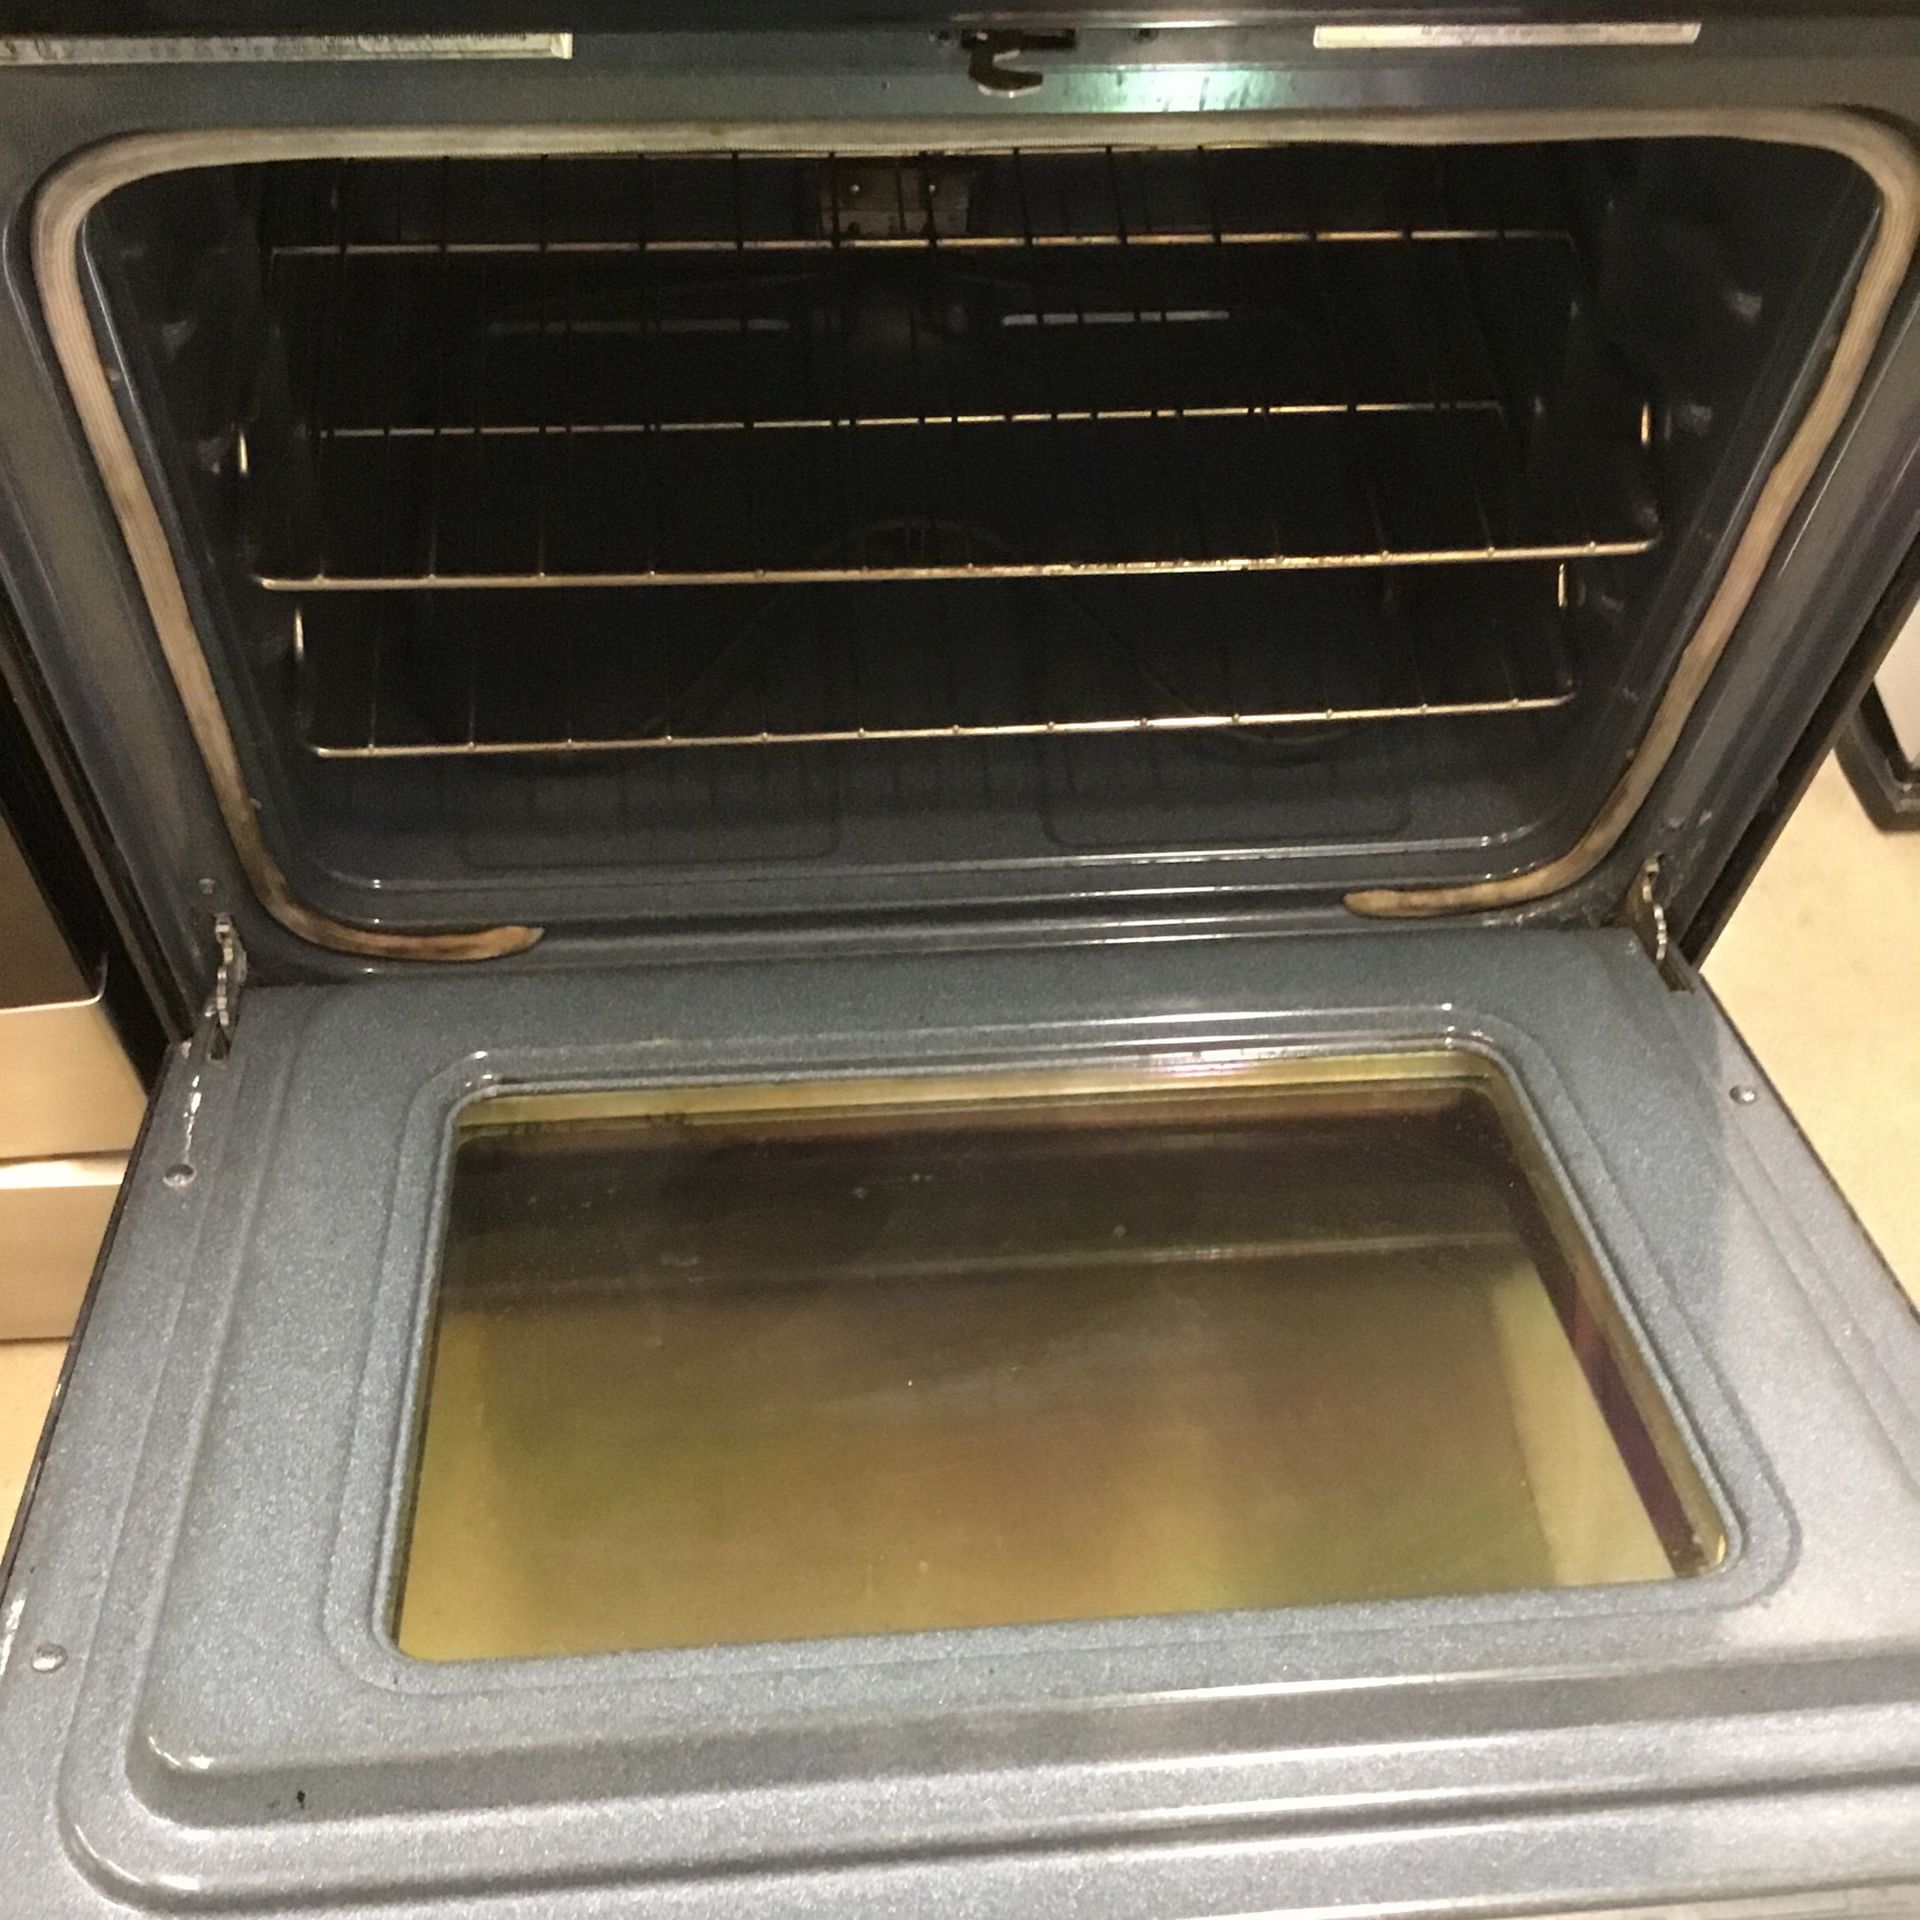 Whirlpool 4 Burners Electric Stove for Sale in Indianapolis, IN - OfferUp